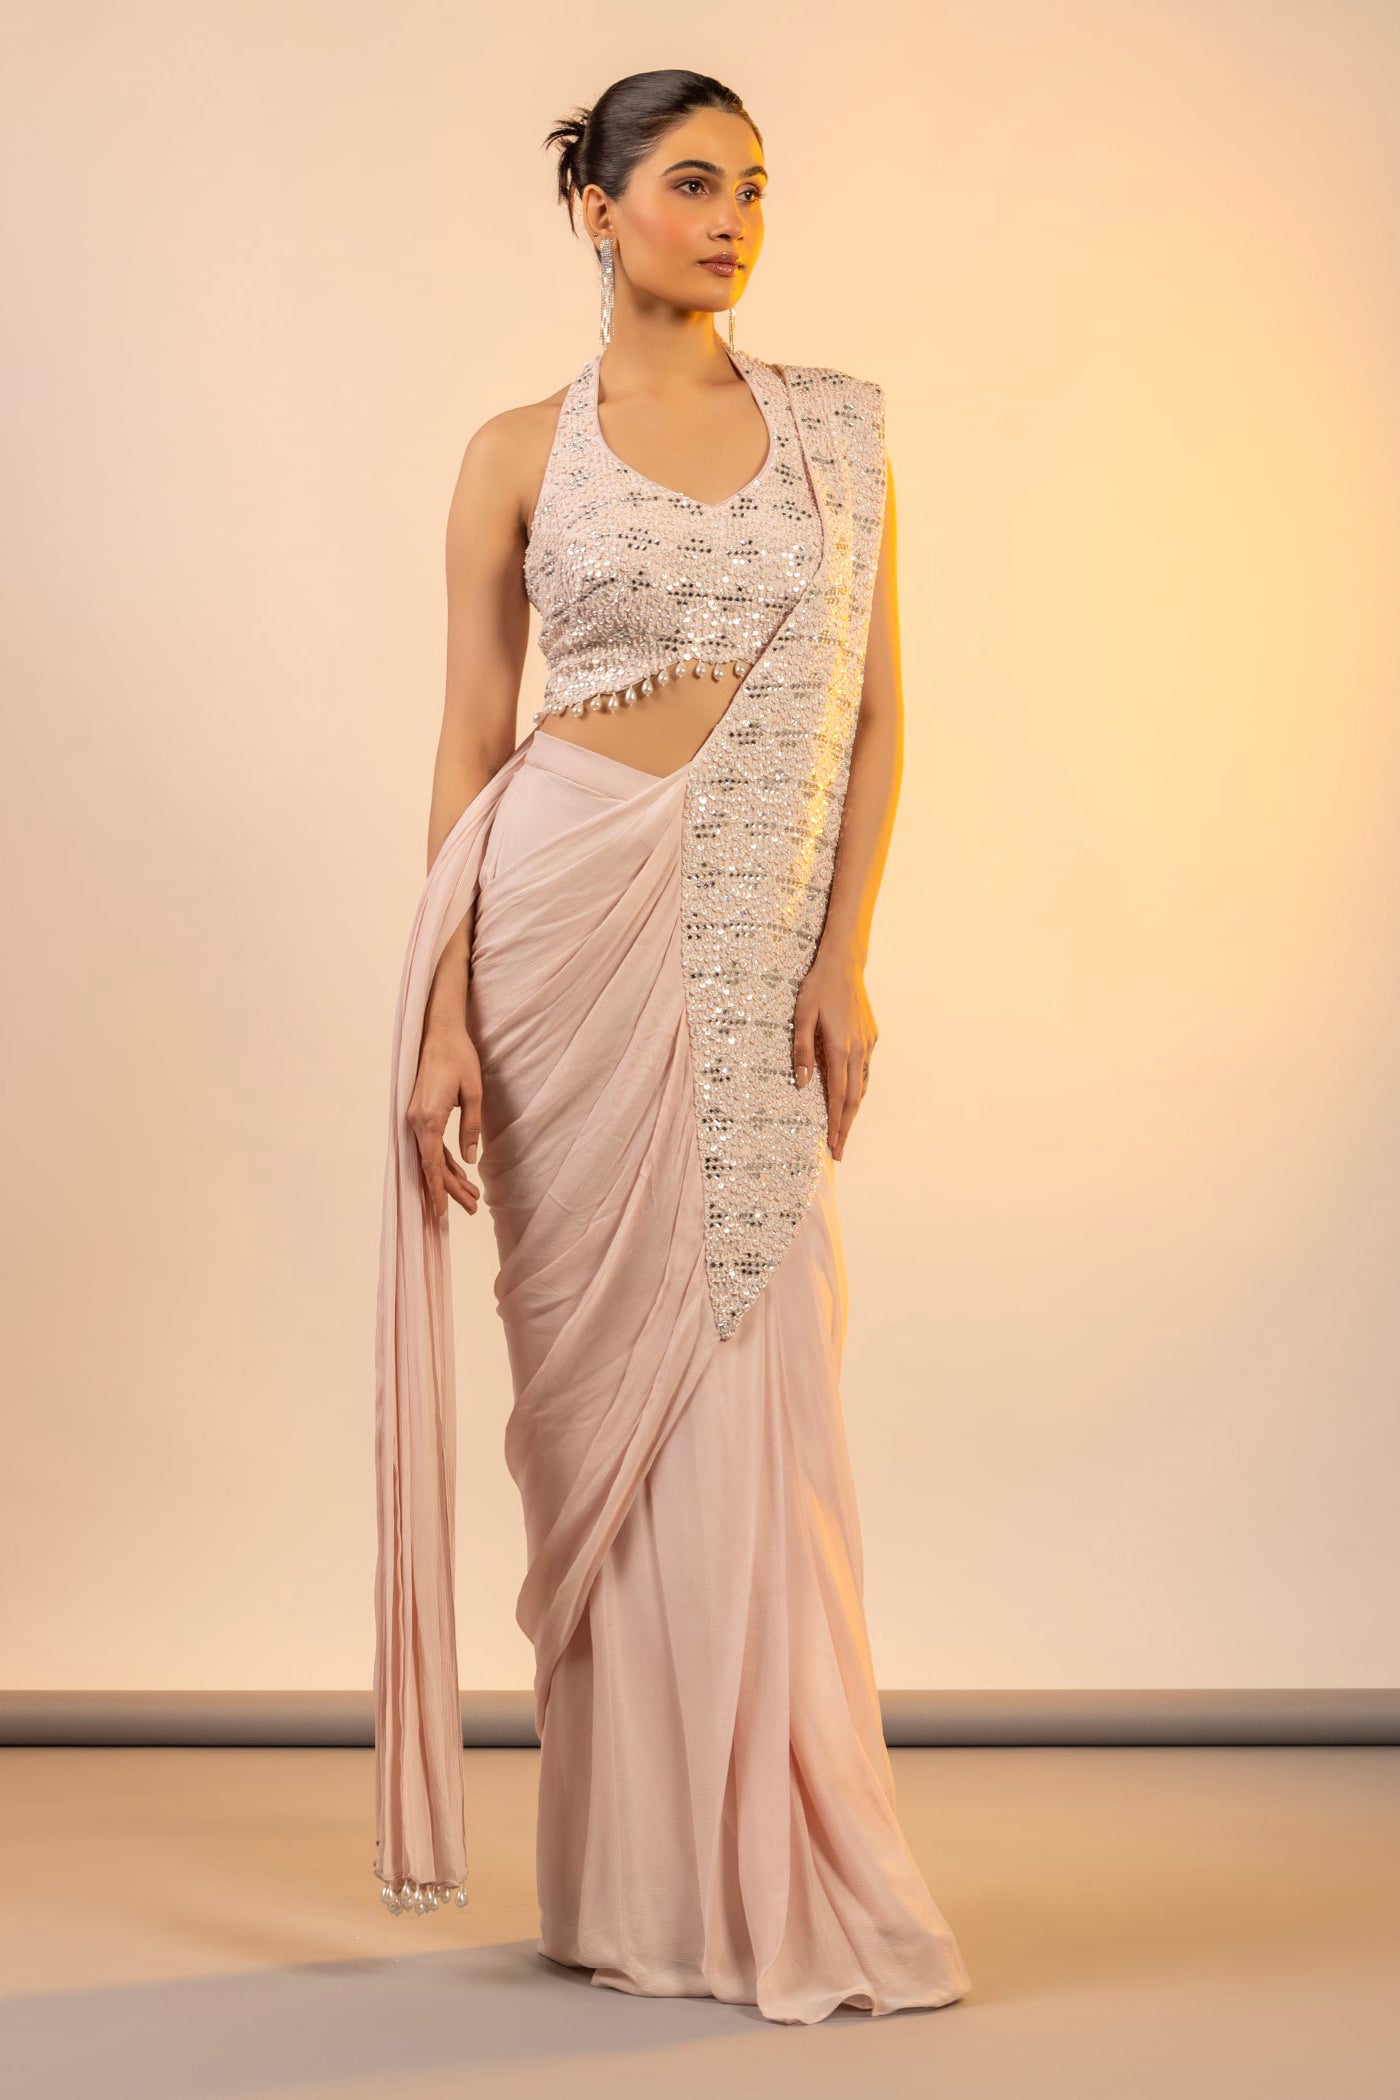 Blush pink drape saree with crystal and sequins